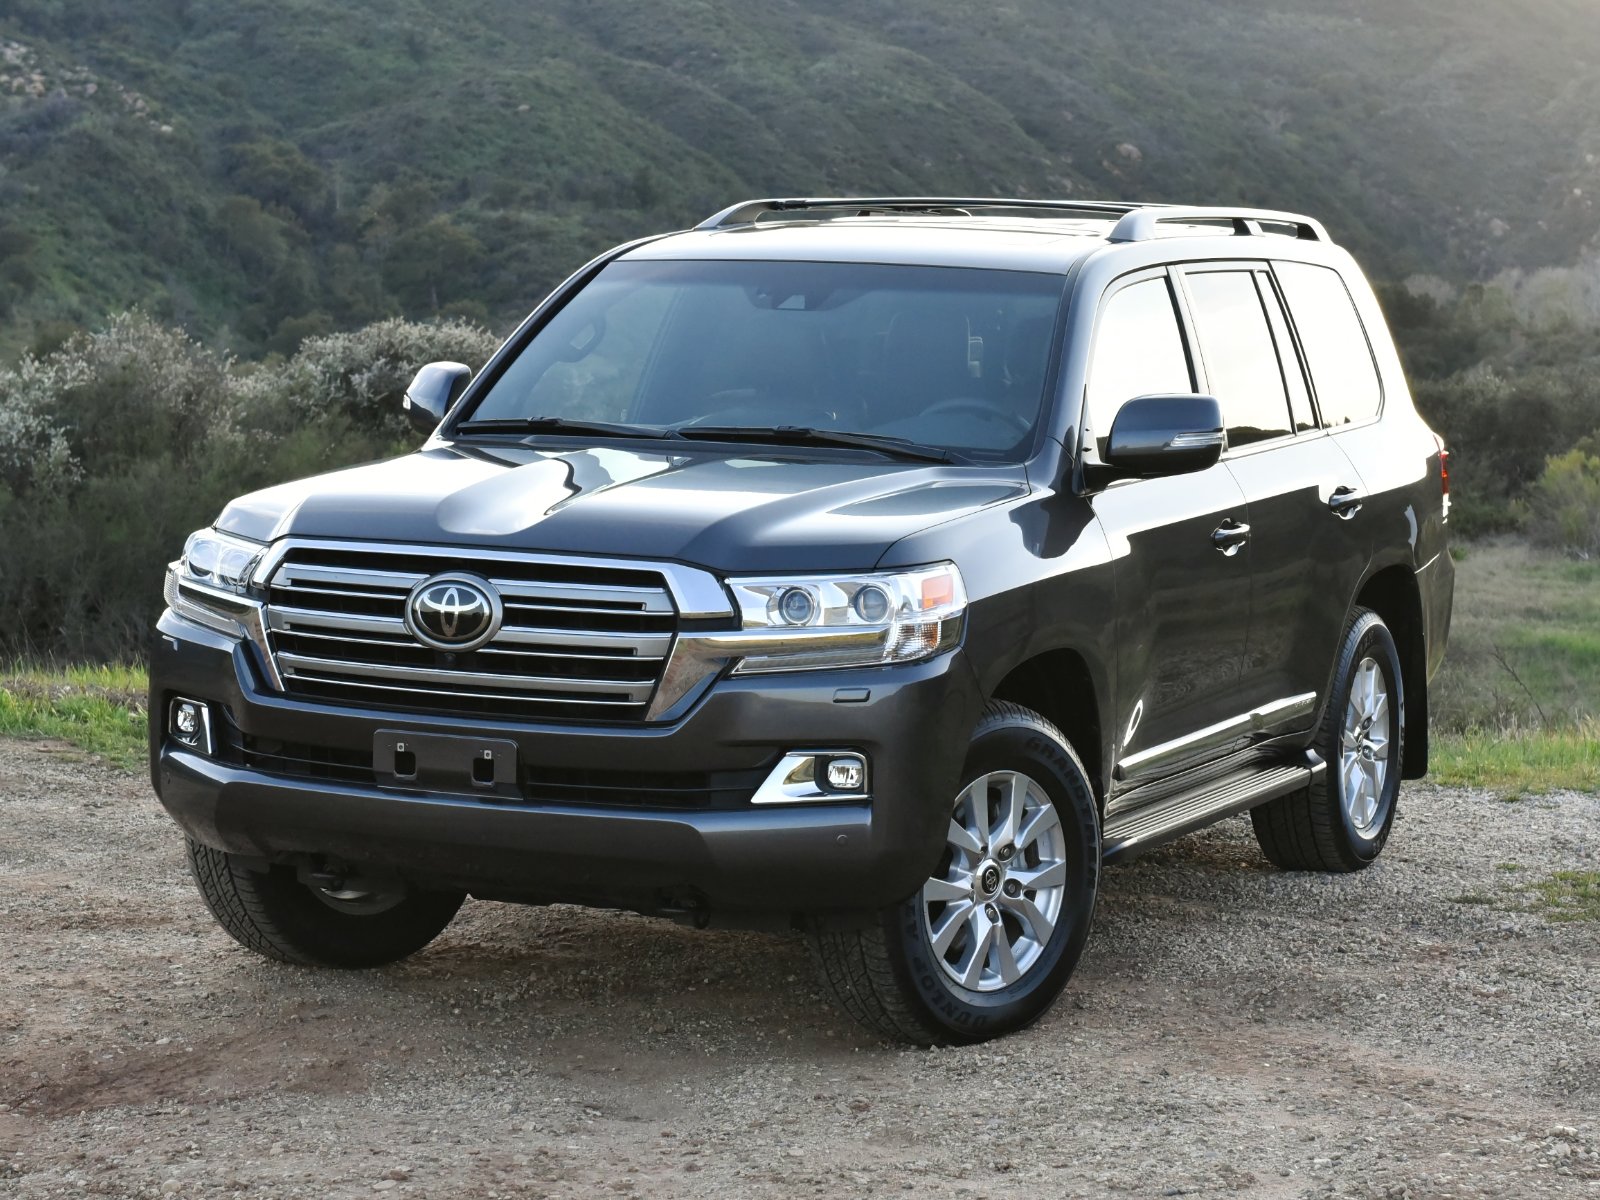 2021 Toyota Land Cruiser: Prices, Reviews & Pictures - CarGurus